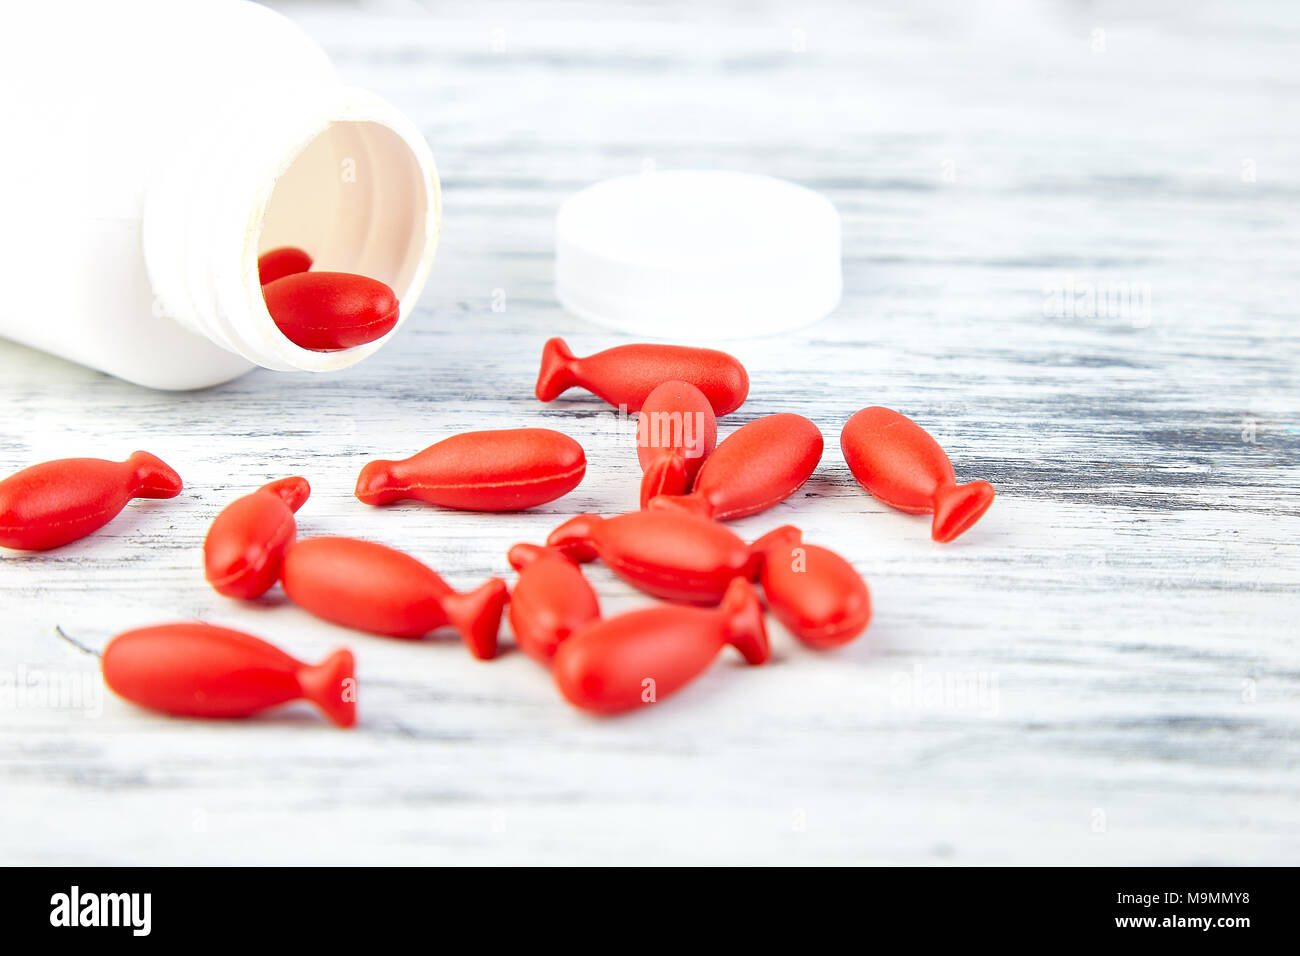 Download Omega 3 In Fish Shaped Red Capsules Of Fish Oil In Bottle On White Background Copy Space Stock Photo Alamy Yellowimages Mockups